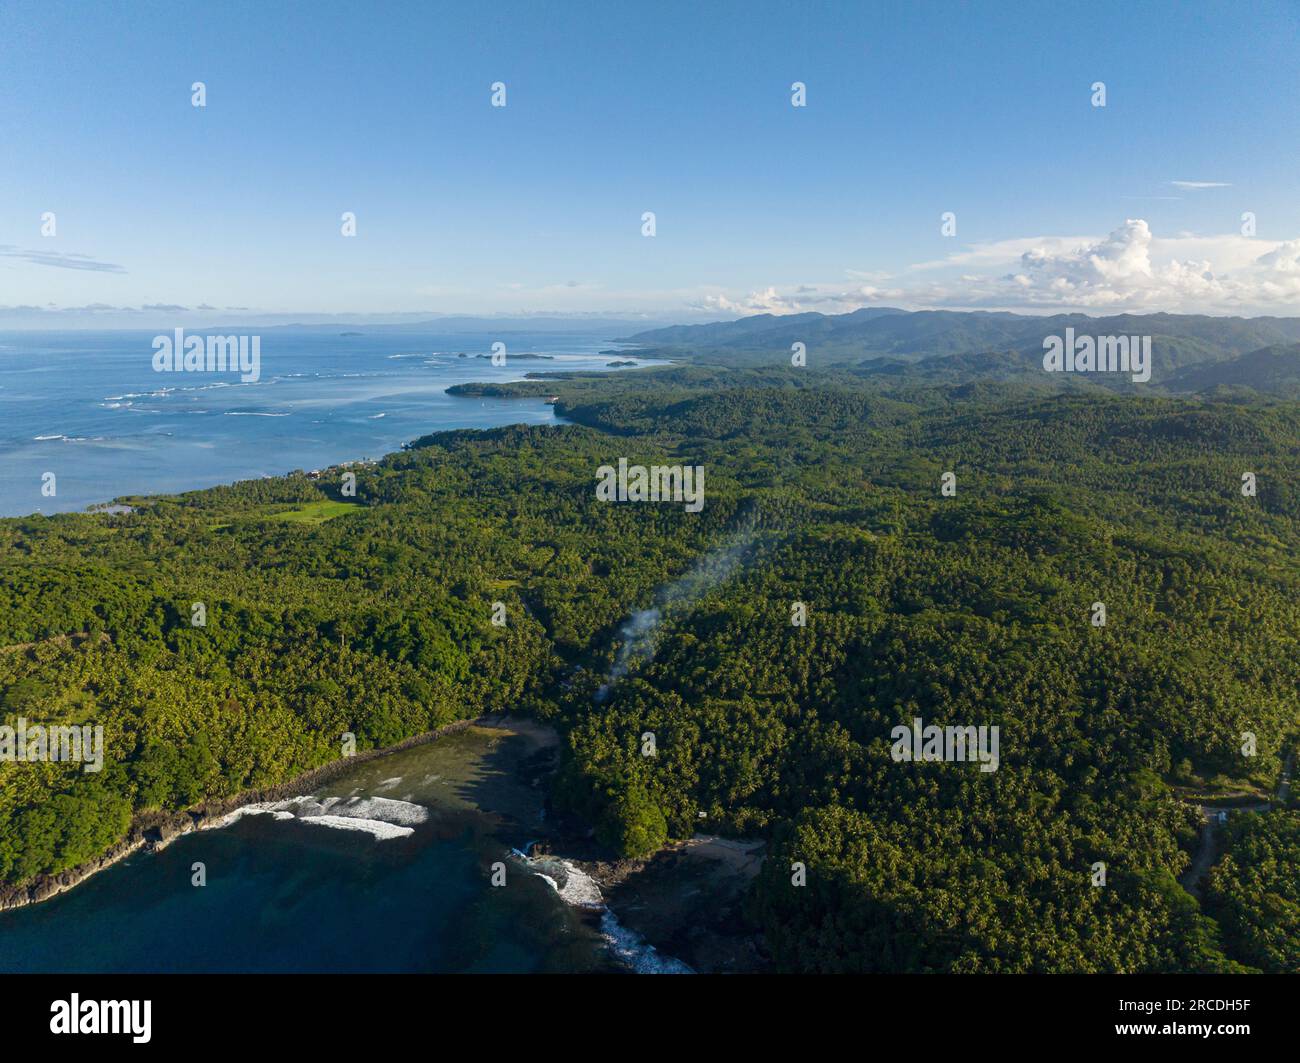 Top view of Tropical Landscape. Blue sky and ocean waves. Surigao del Sur. Mindanao, Philippines. Stock Photo